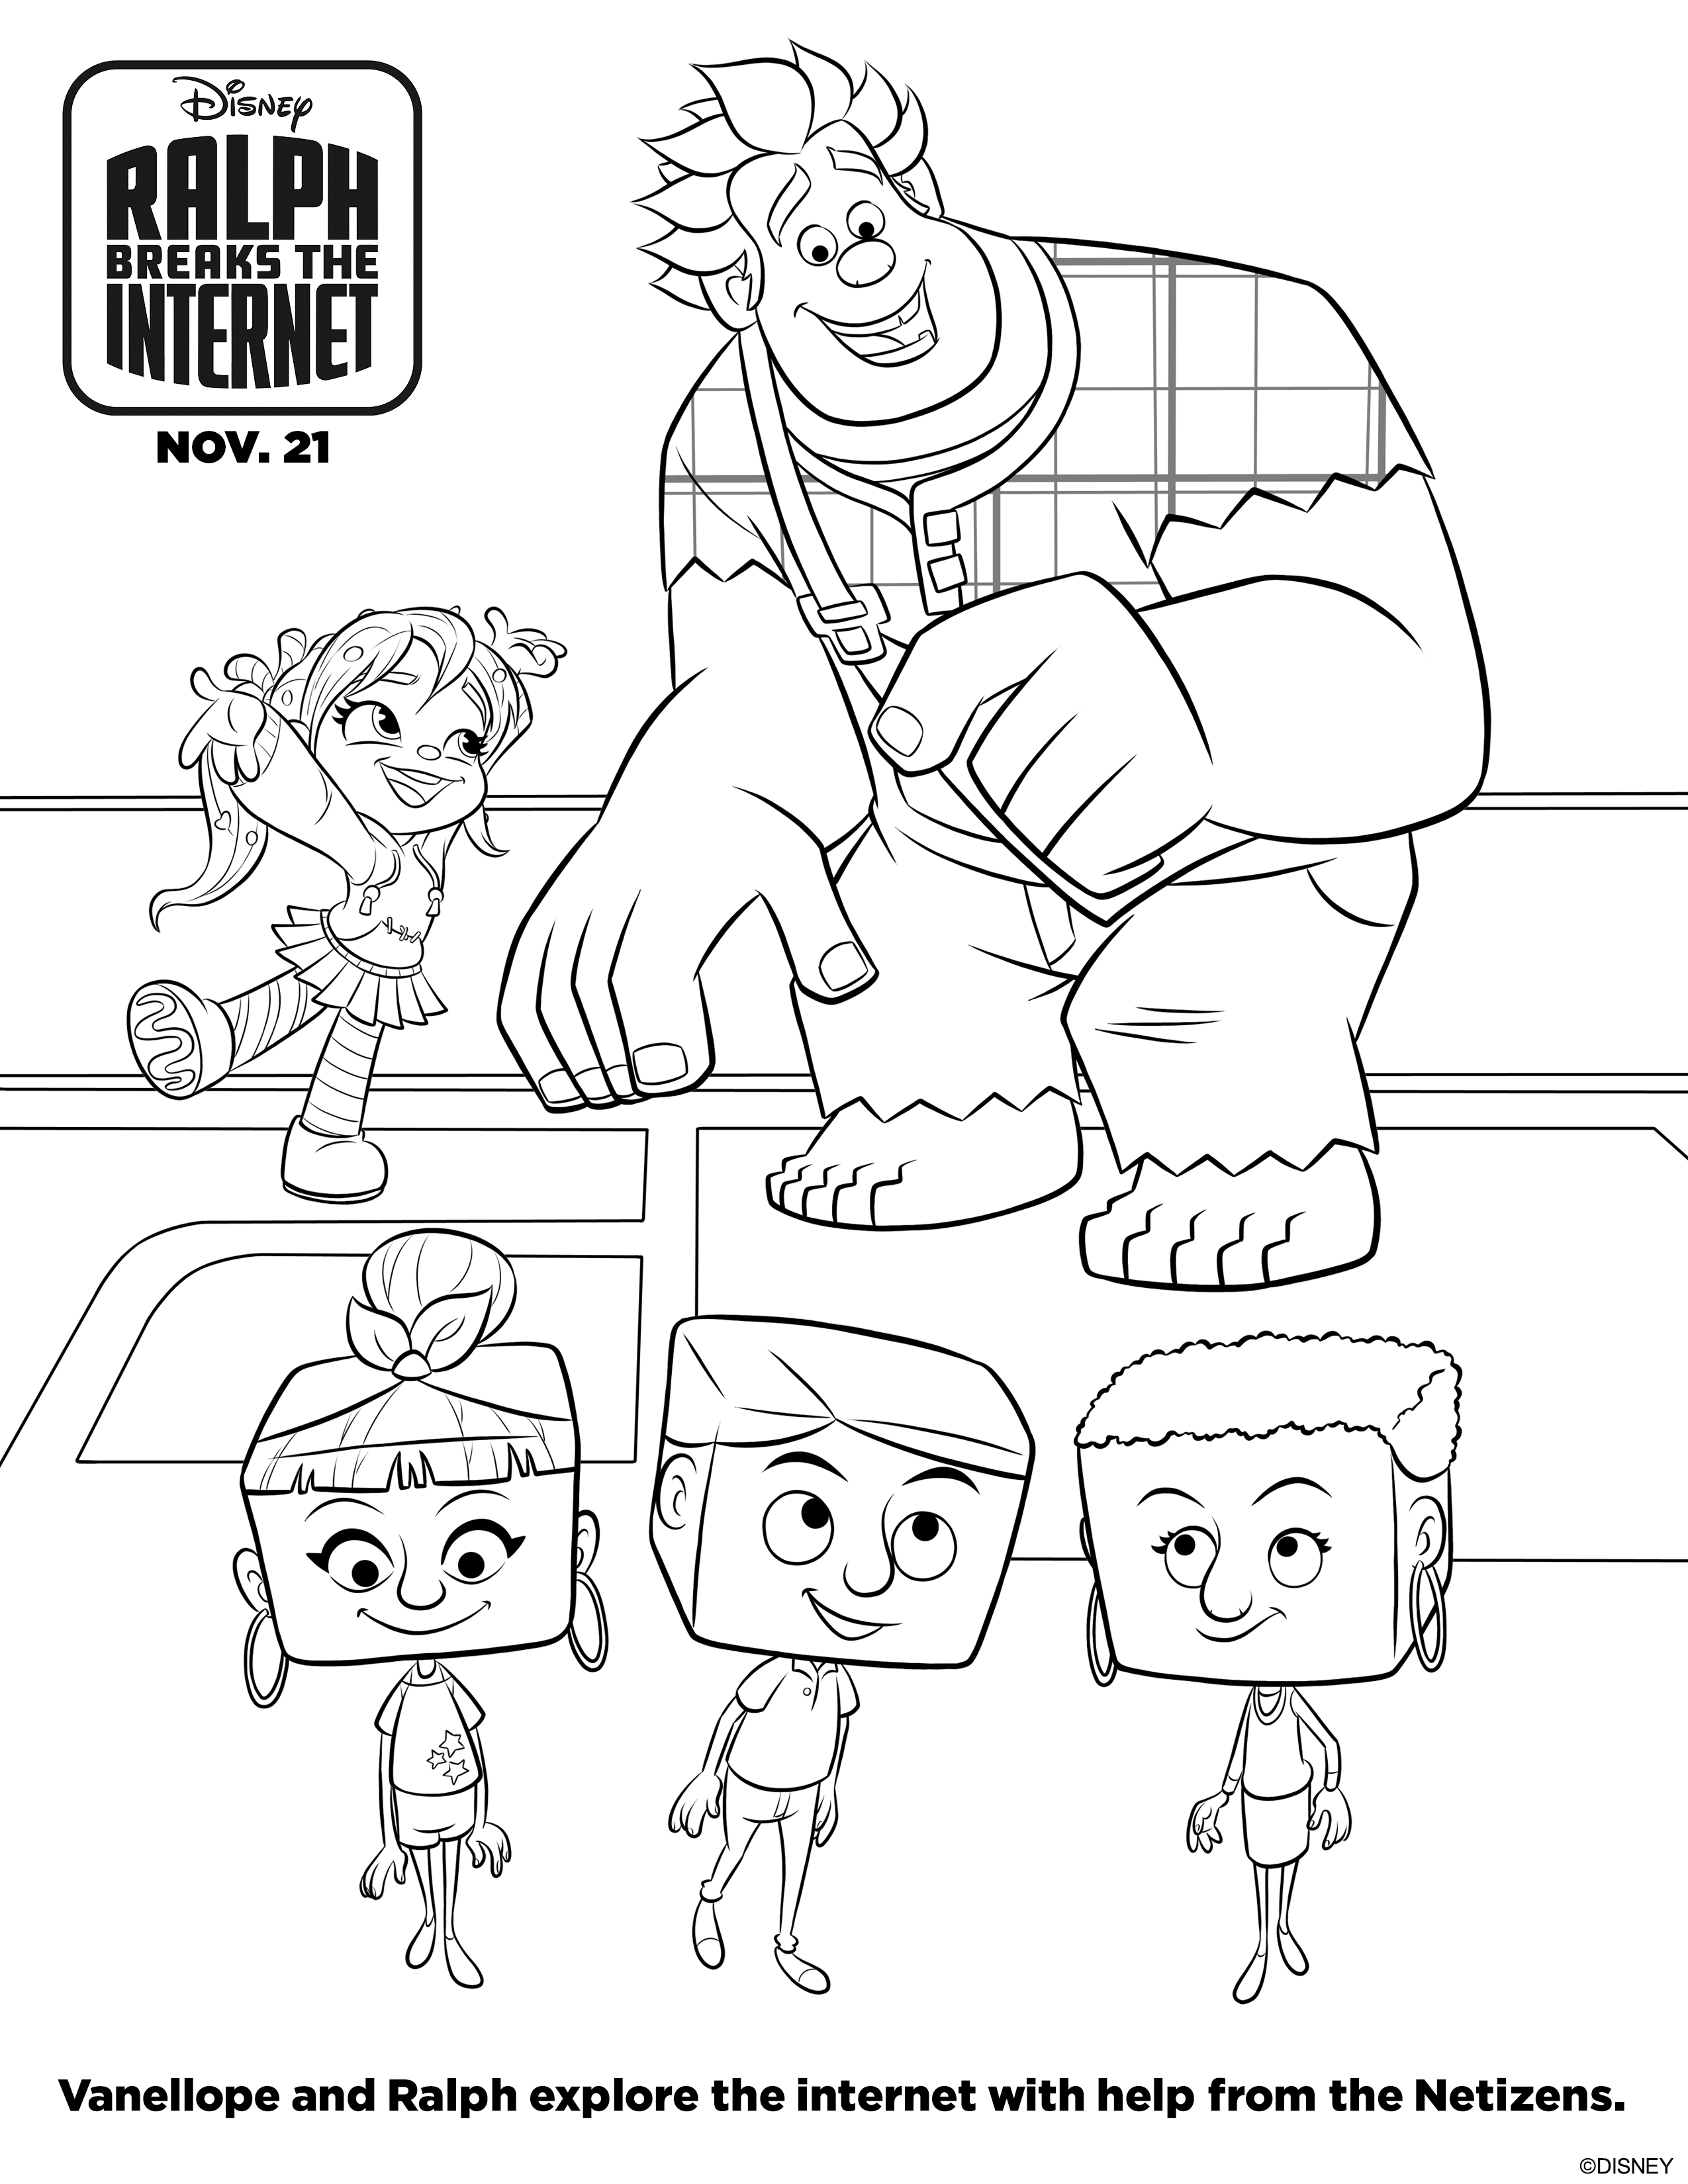 Ralph Breaks the Internet Printable and Coloring Pages. Free pages from the 2nd Wreck-it Ralph movie. #printable #freeprintable #disney